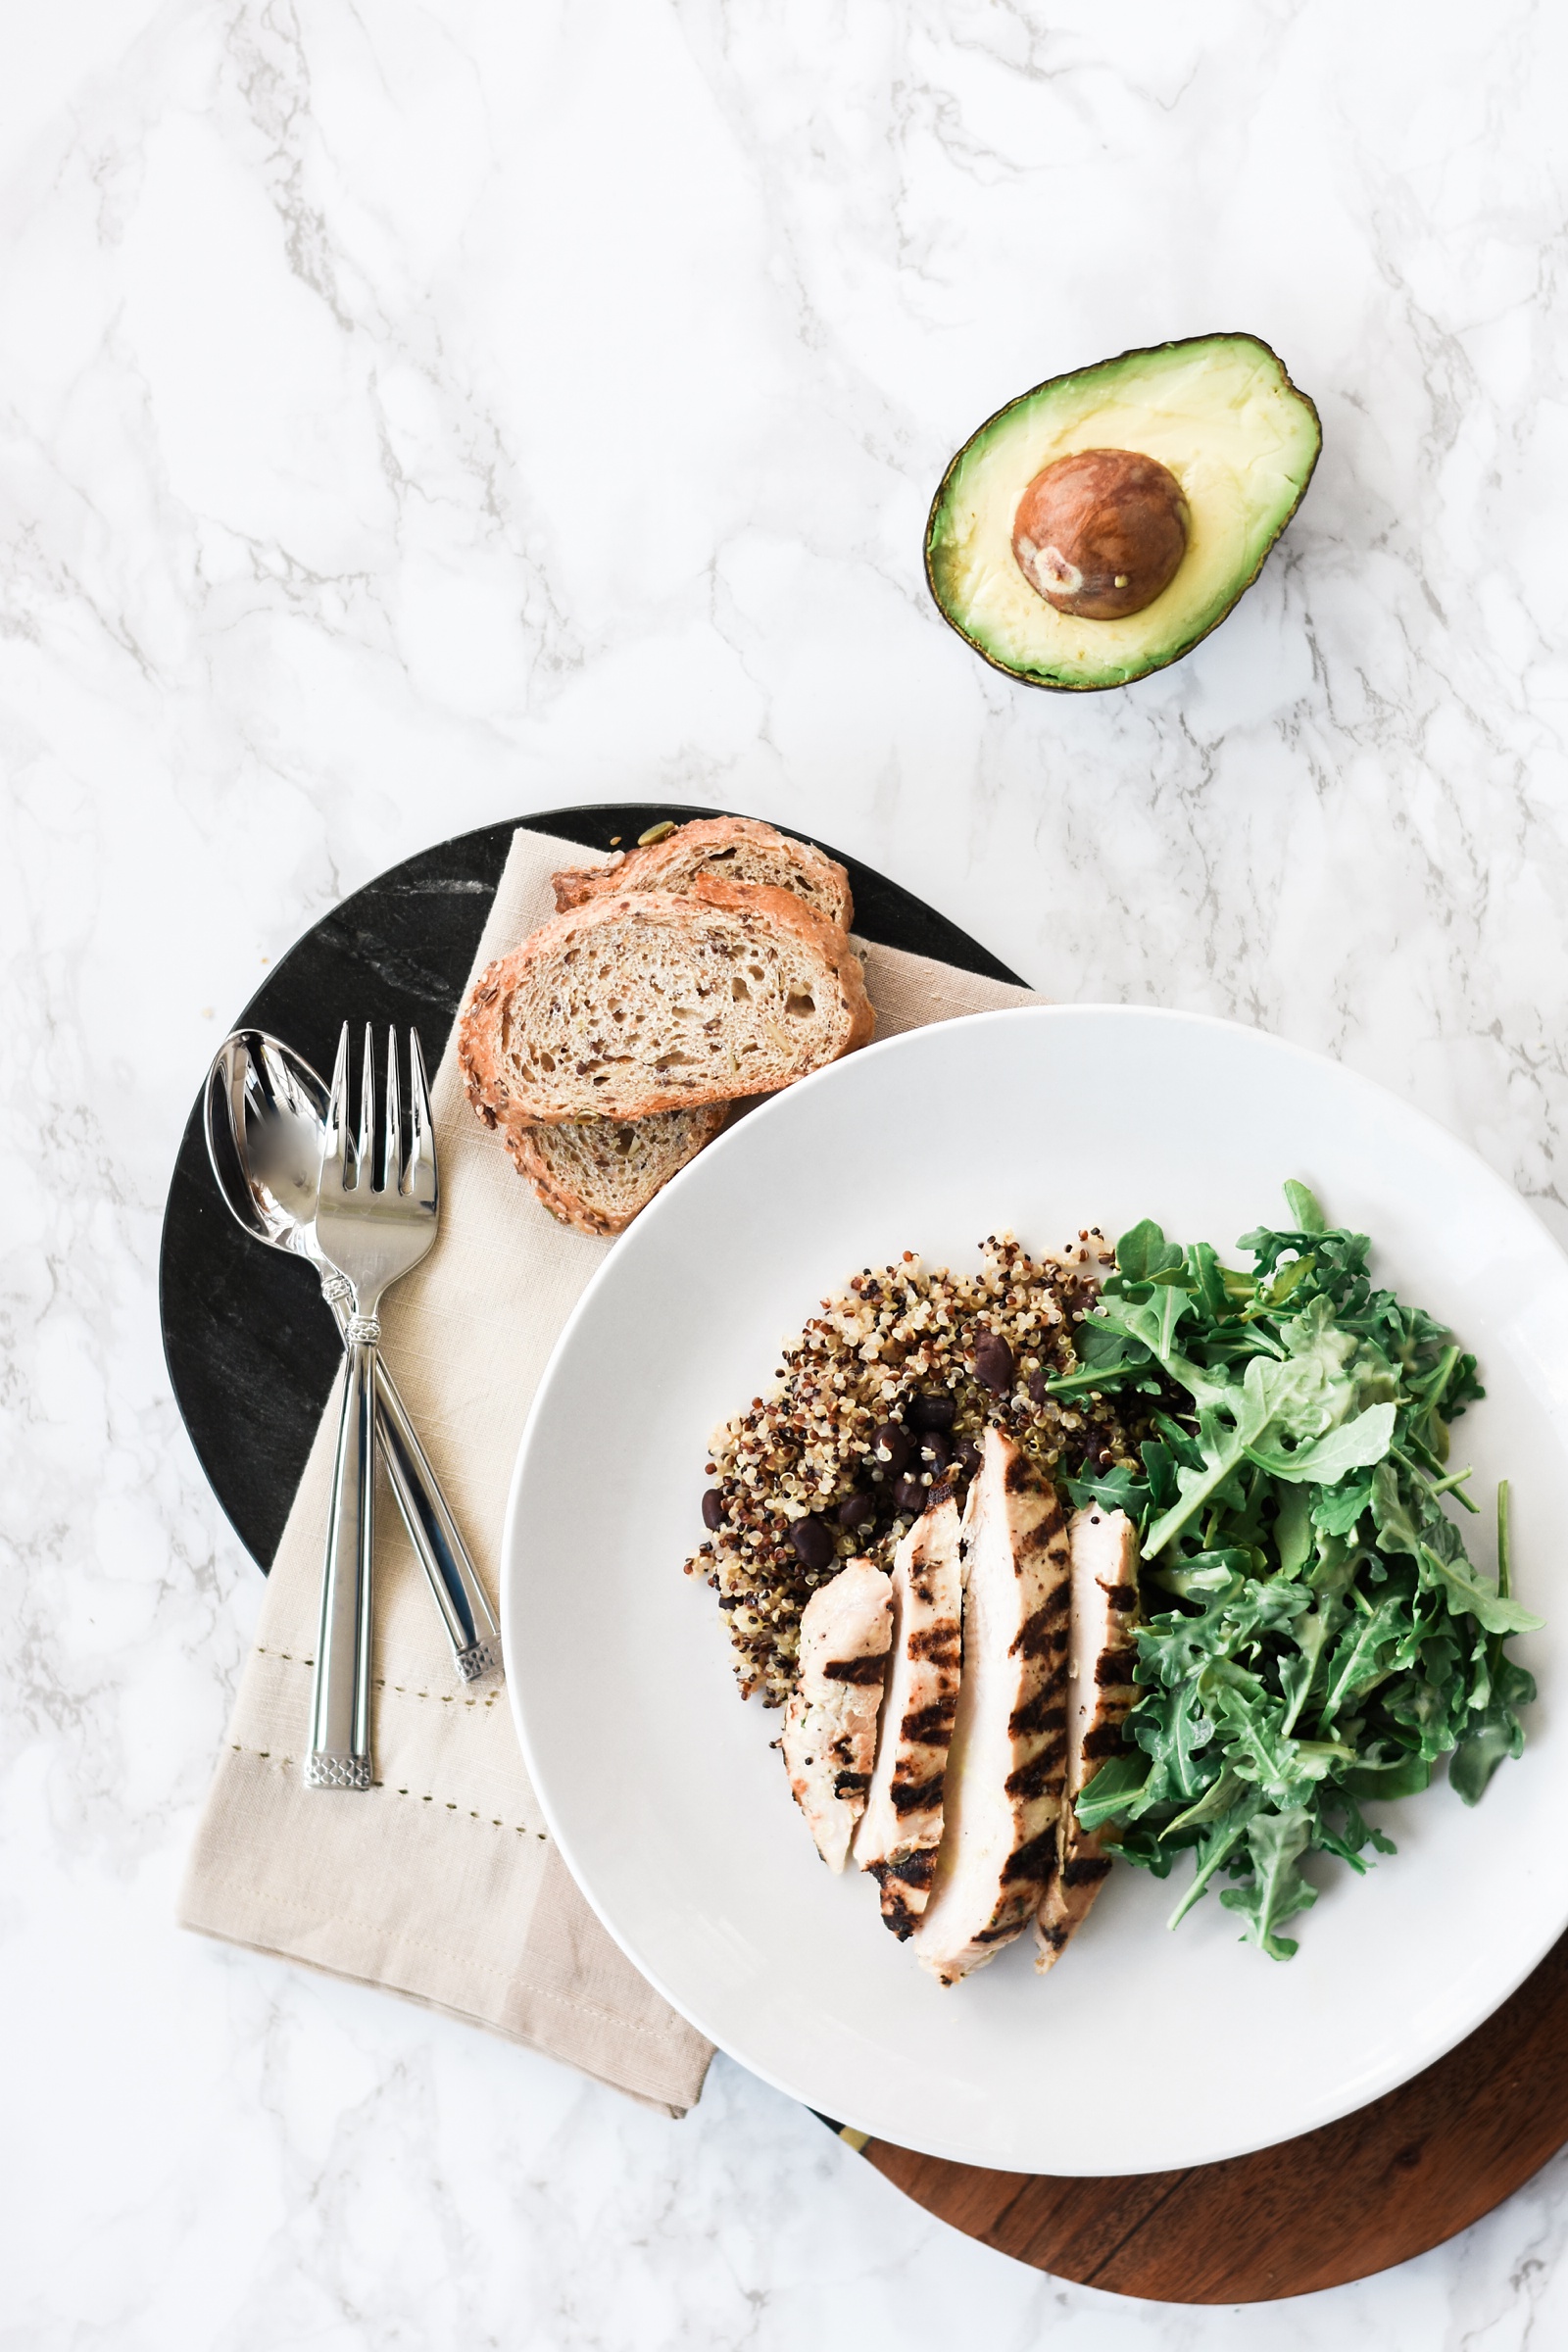 Two Days of Healthy Meals for Under $20